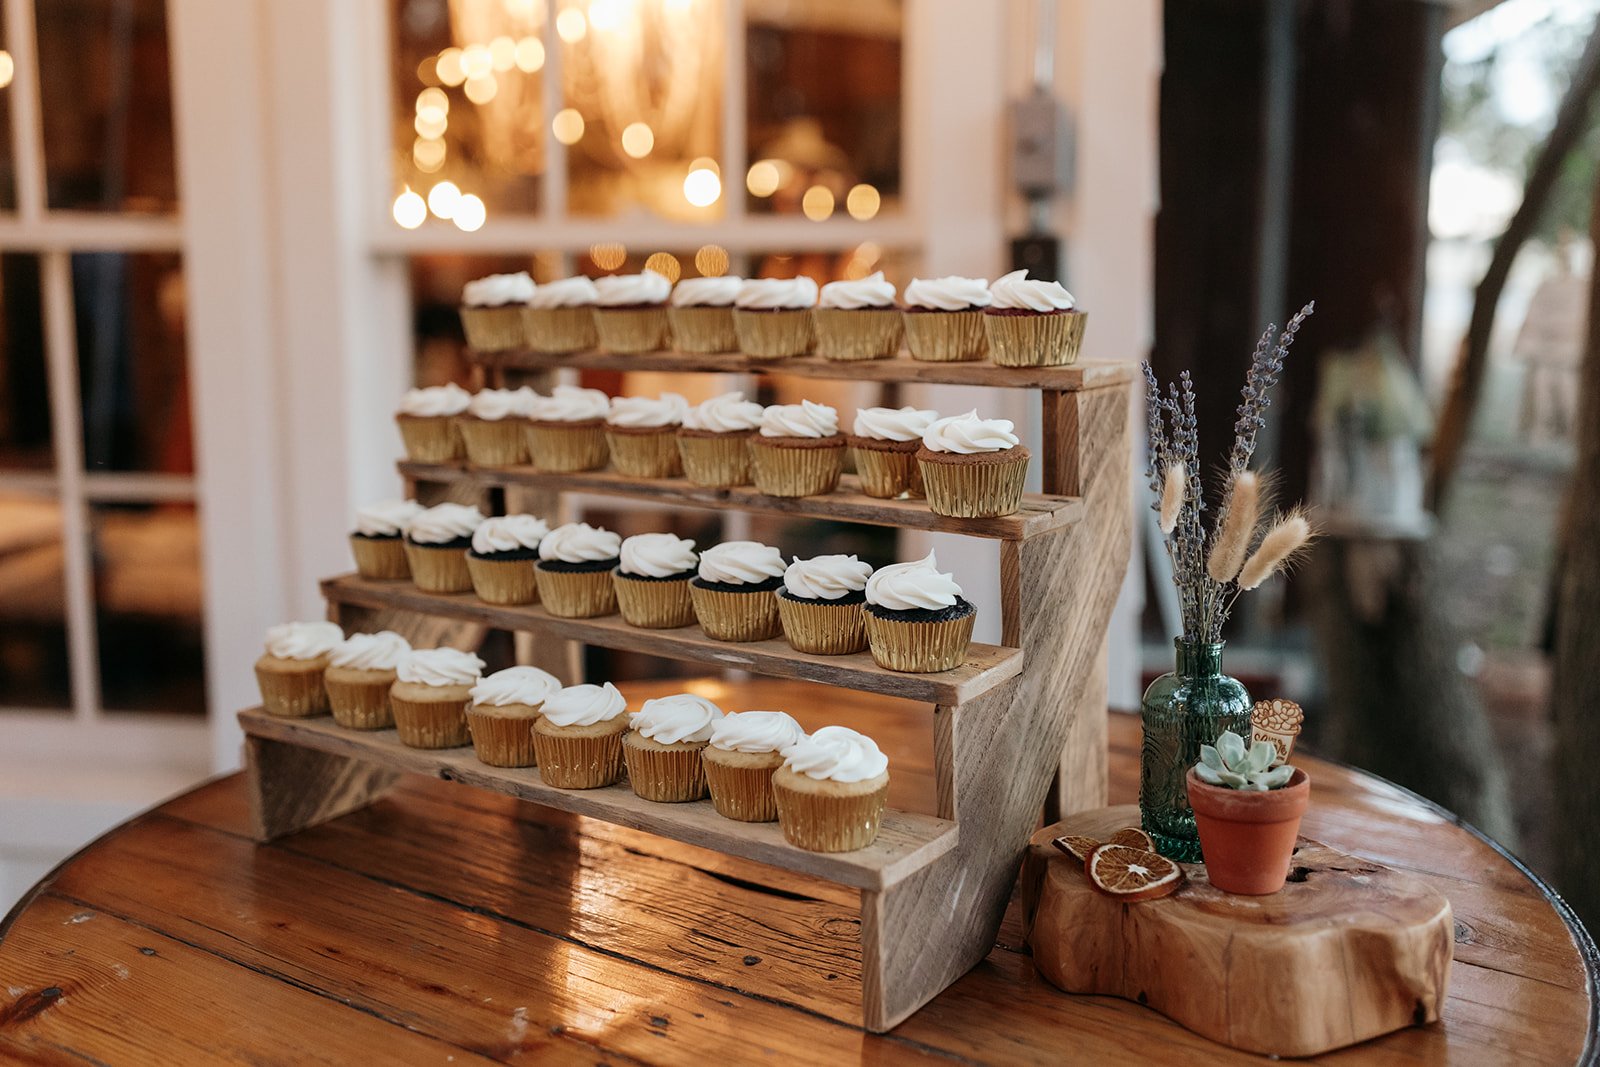 Cupcakes are perfect for a smaller, more intimate wedding